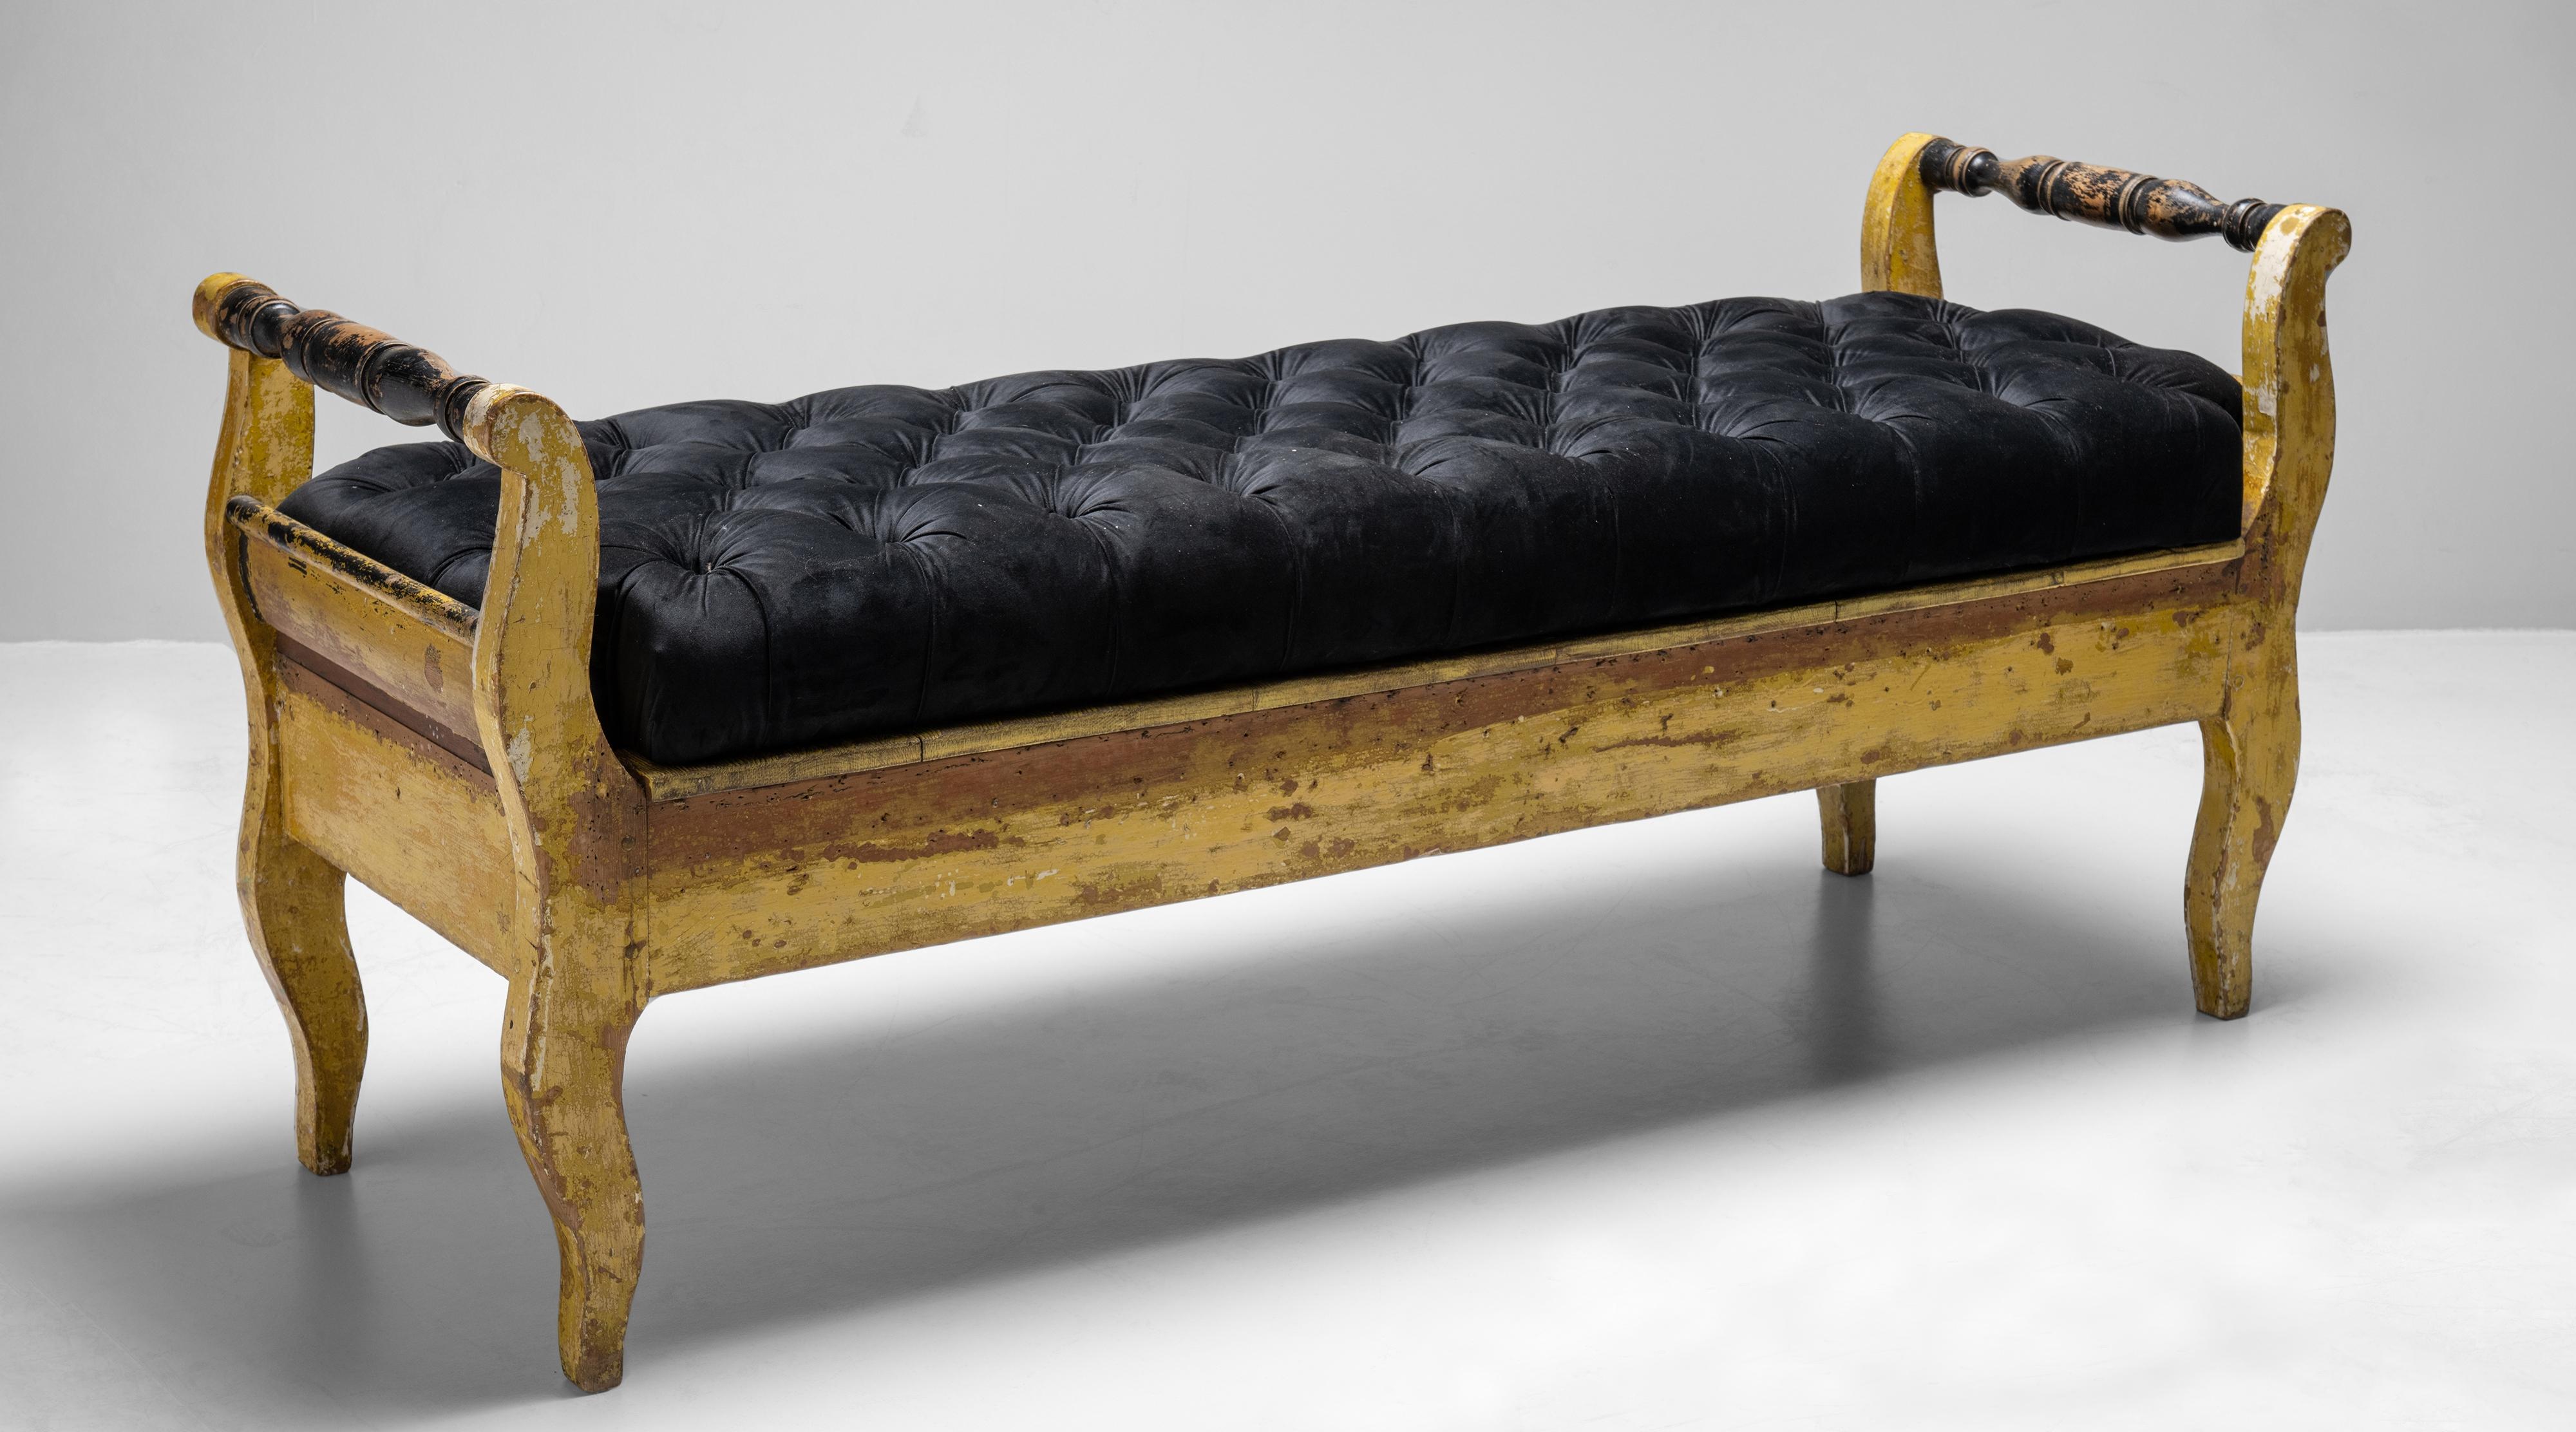 Painted window seat

France circa 1860

Original painted window seat upholstered in deep pile rich black velvet to compliment the ebonised rails and contrasting yellow paint.

Measures: 69” W x 22.5” D x 29” H x 23” seat

$ 6,800.

  